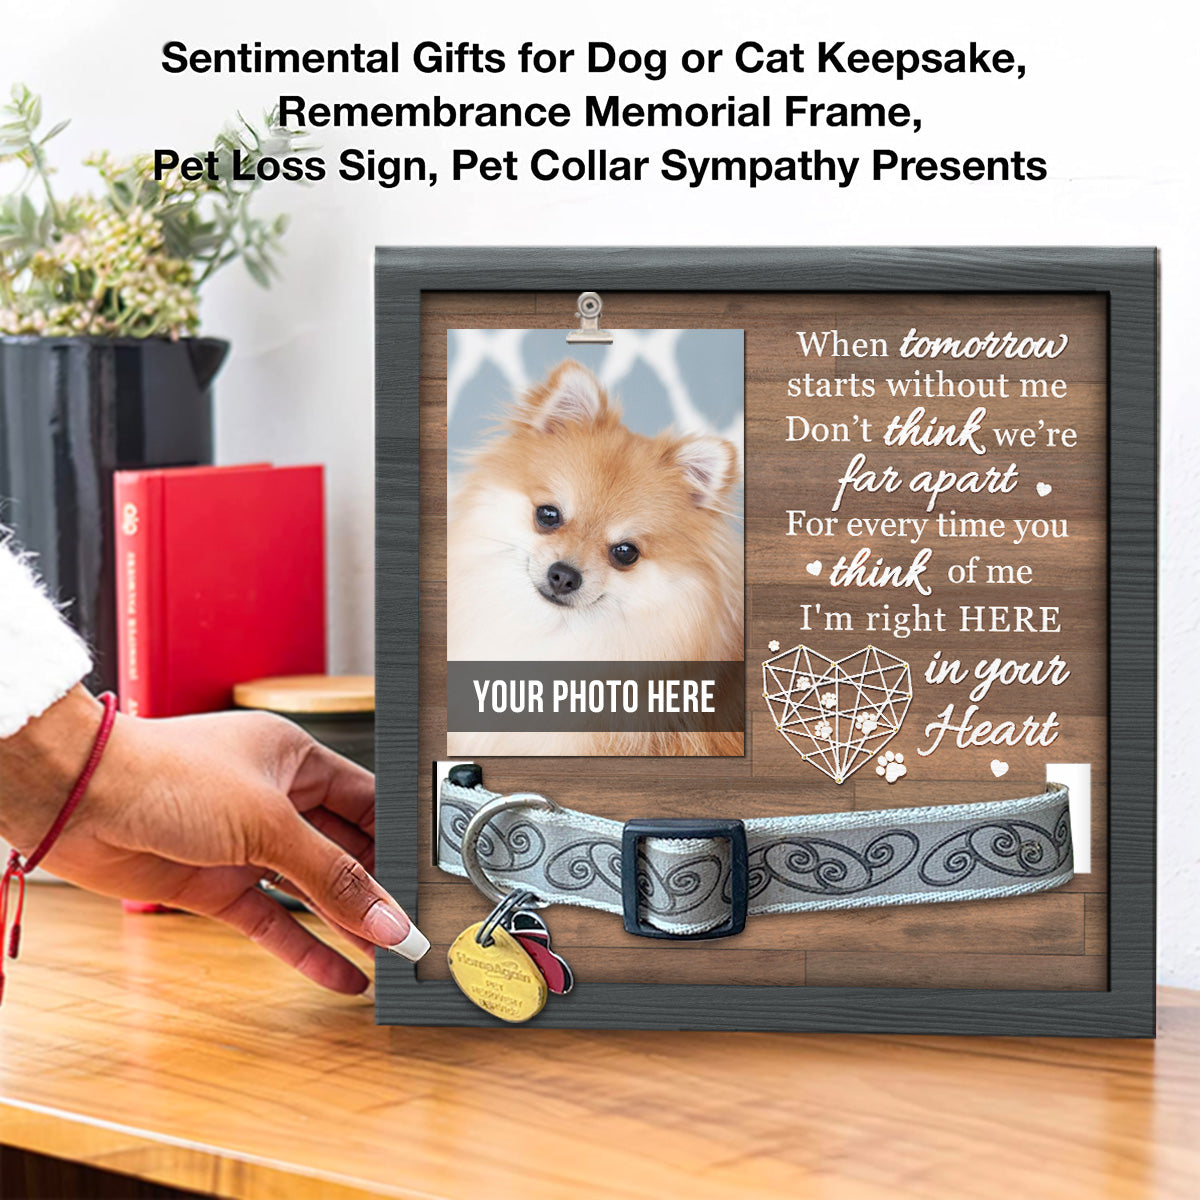 Pet Owners: How to Buy Safe Gifts for Your Cat or Dog